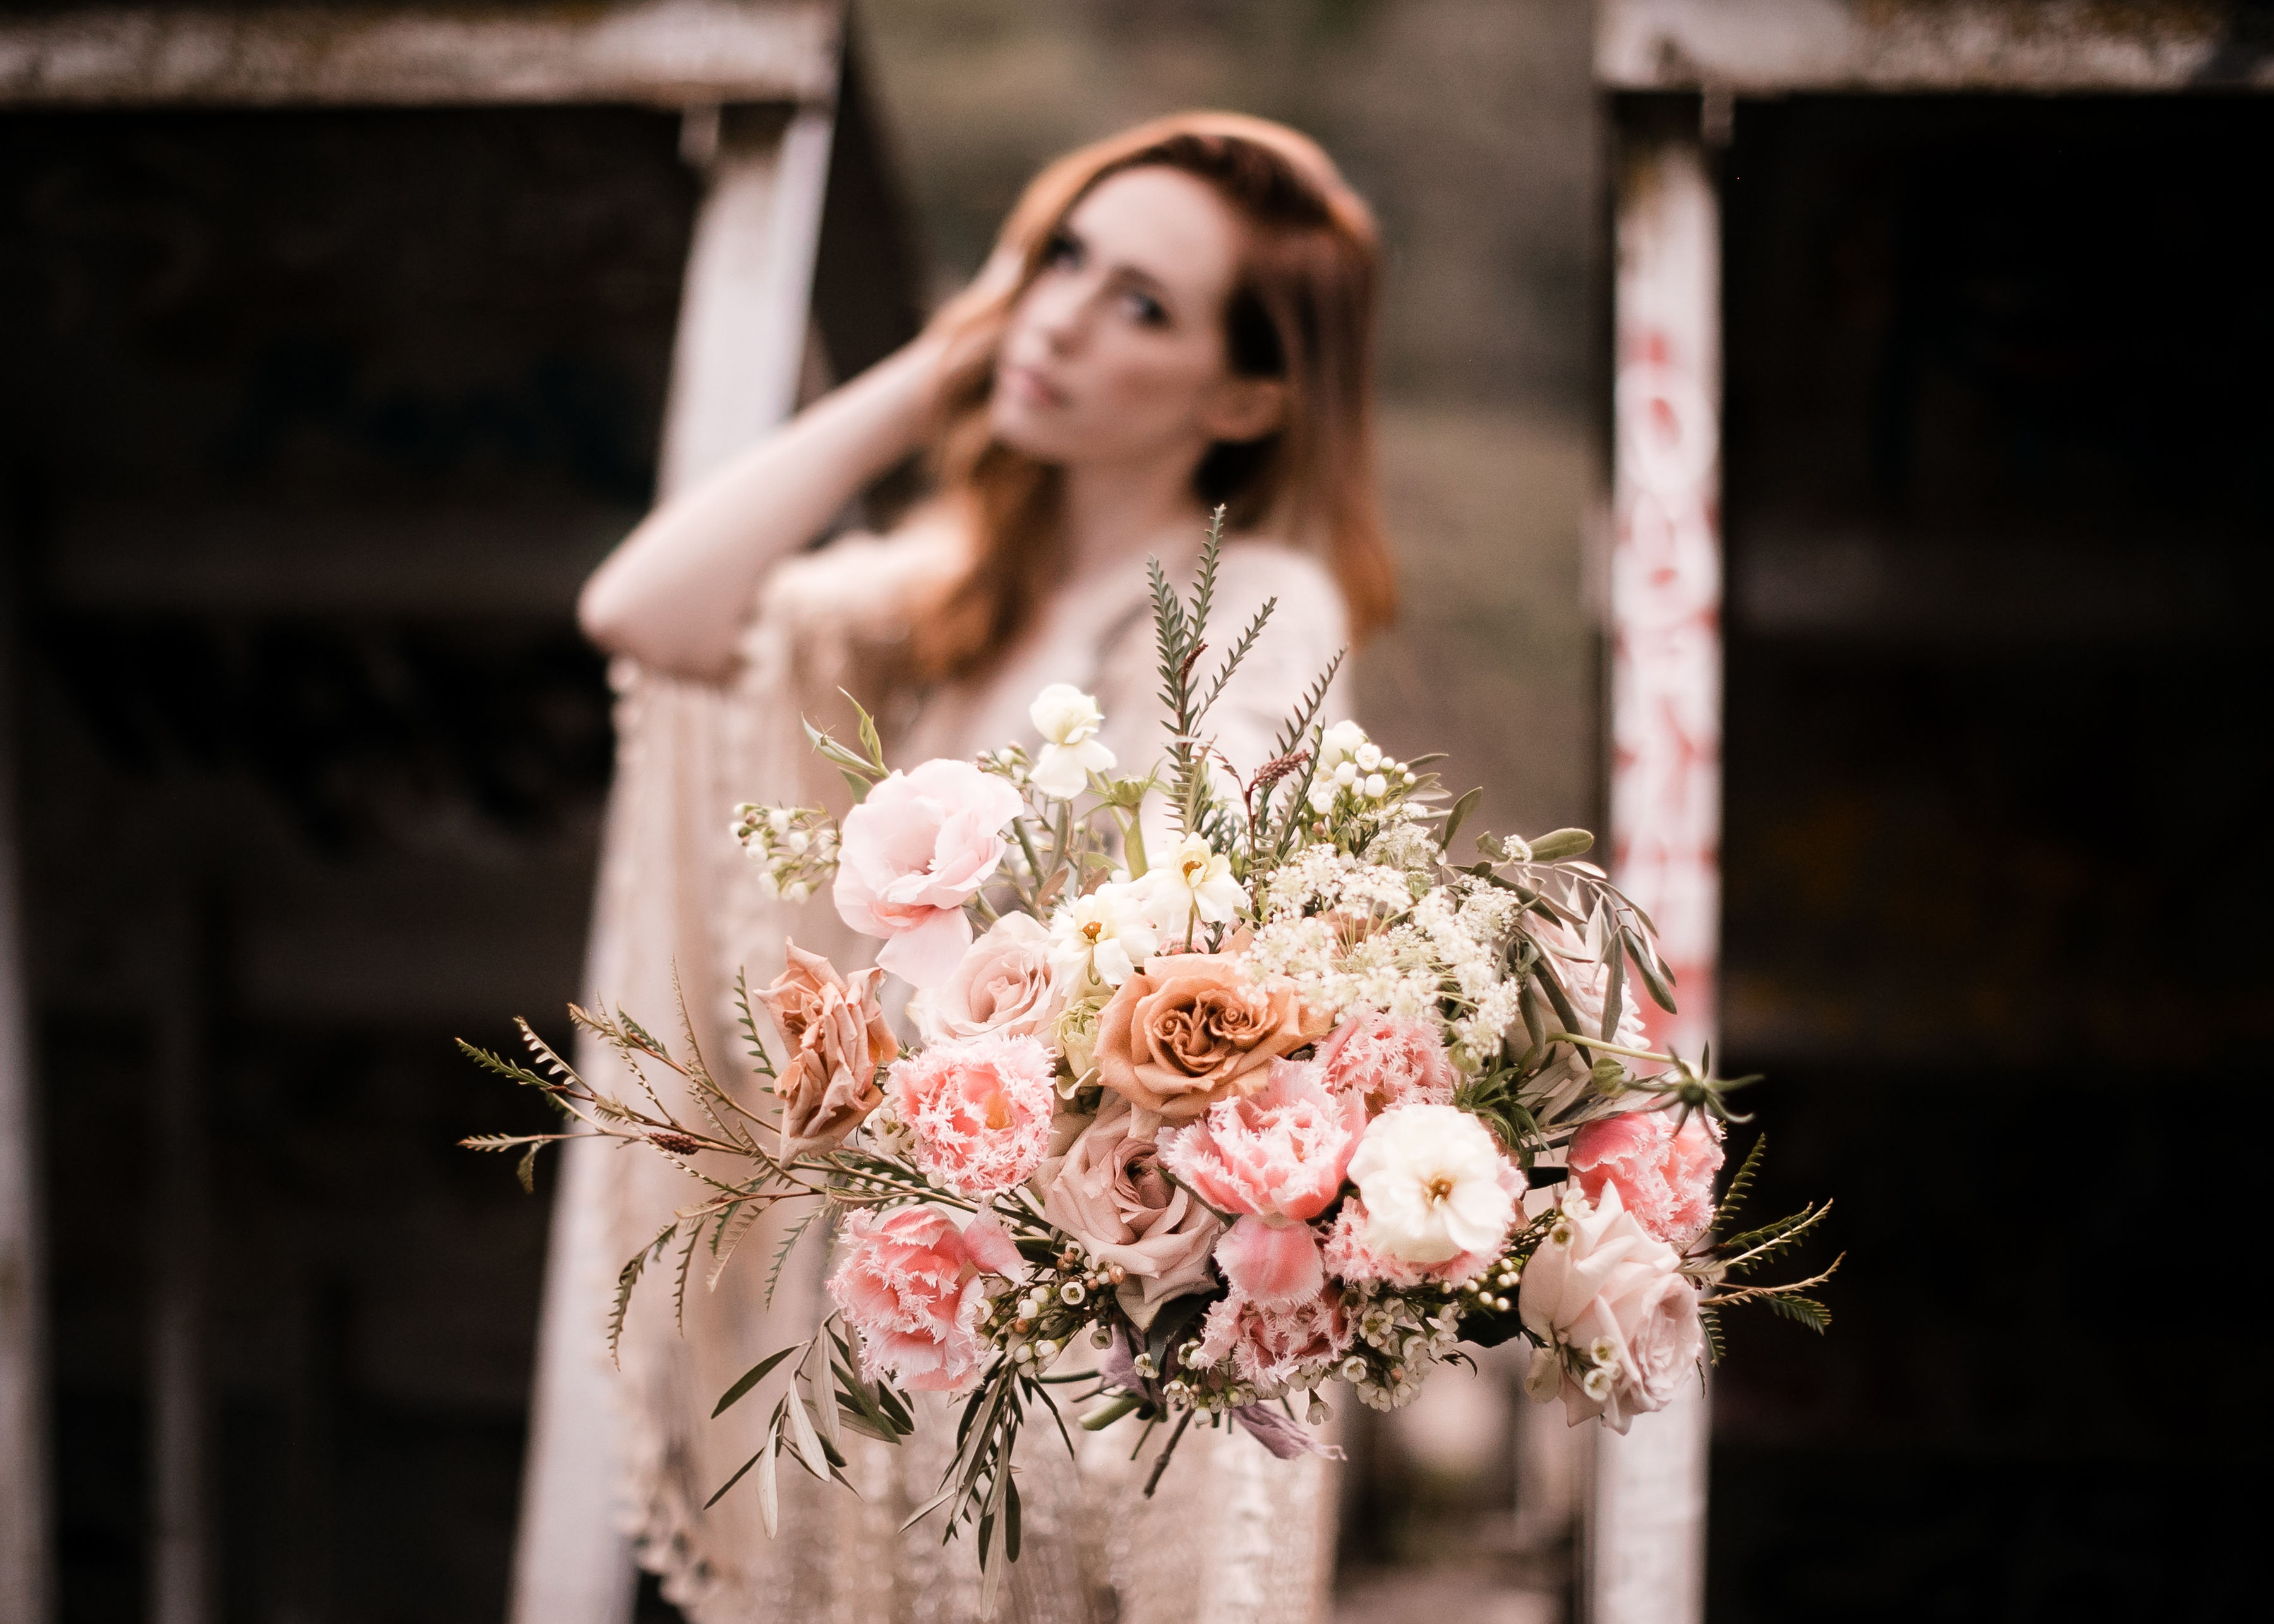 Edgy Rock Princess Bridal Portraits inside an Abandoned Industrial Building